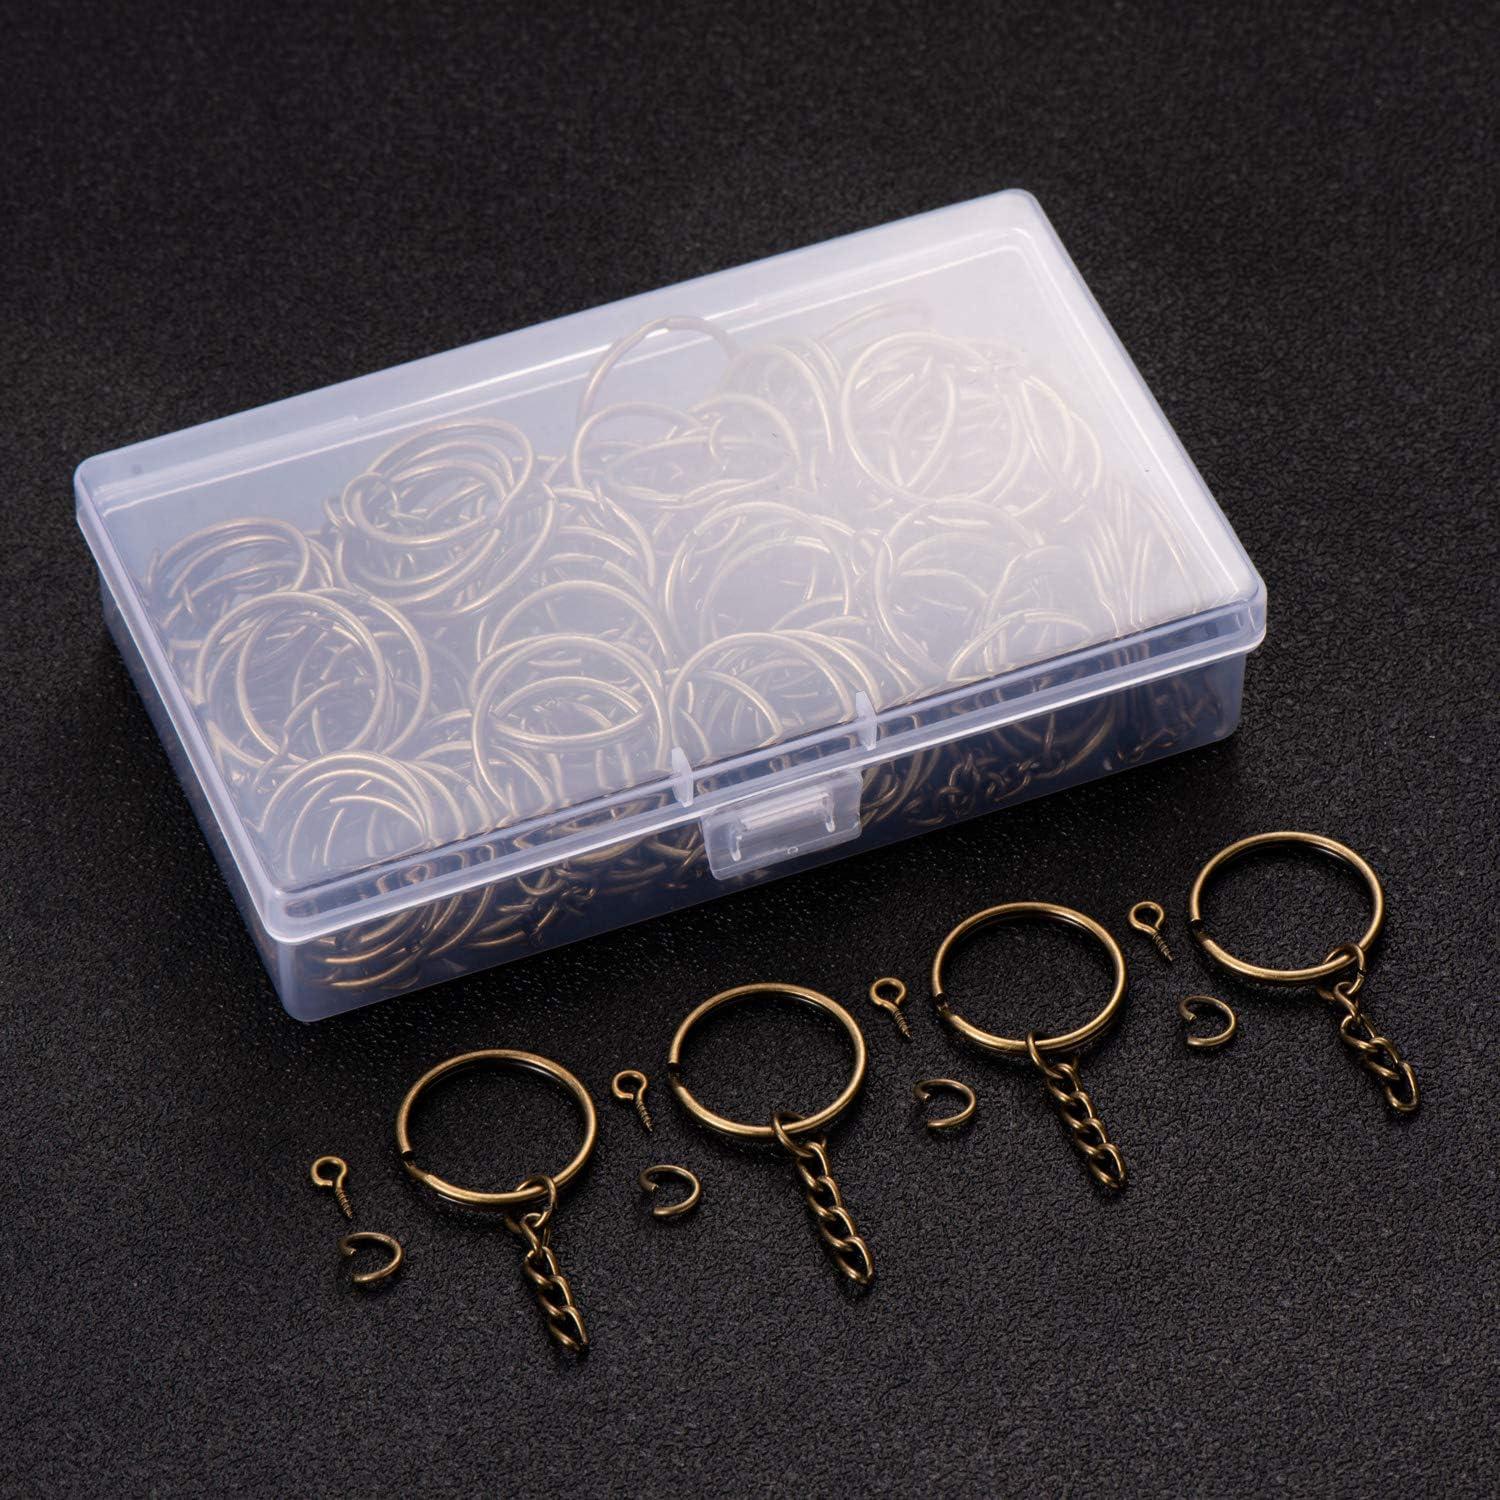 100Pcs Keychain Rings 1 Inch/25mm Antique Bronze Key Chain Rings with  100Pcs Jump Rings and 100Pcs Screw Eye Pins Bulk for Crafts